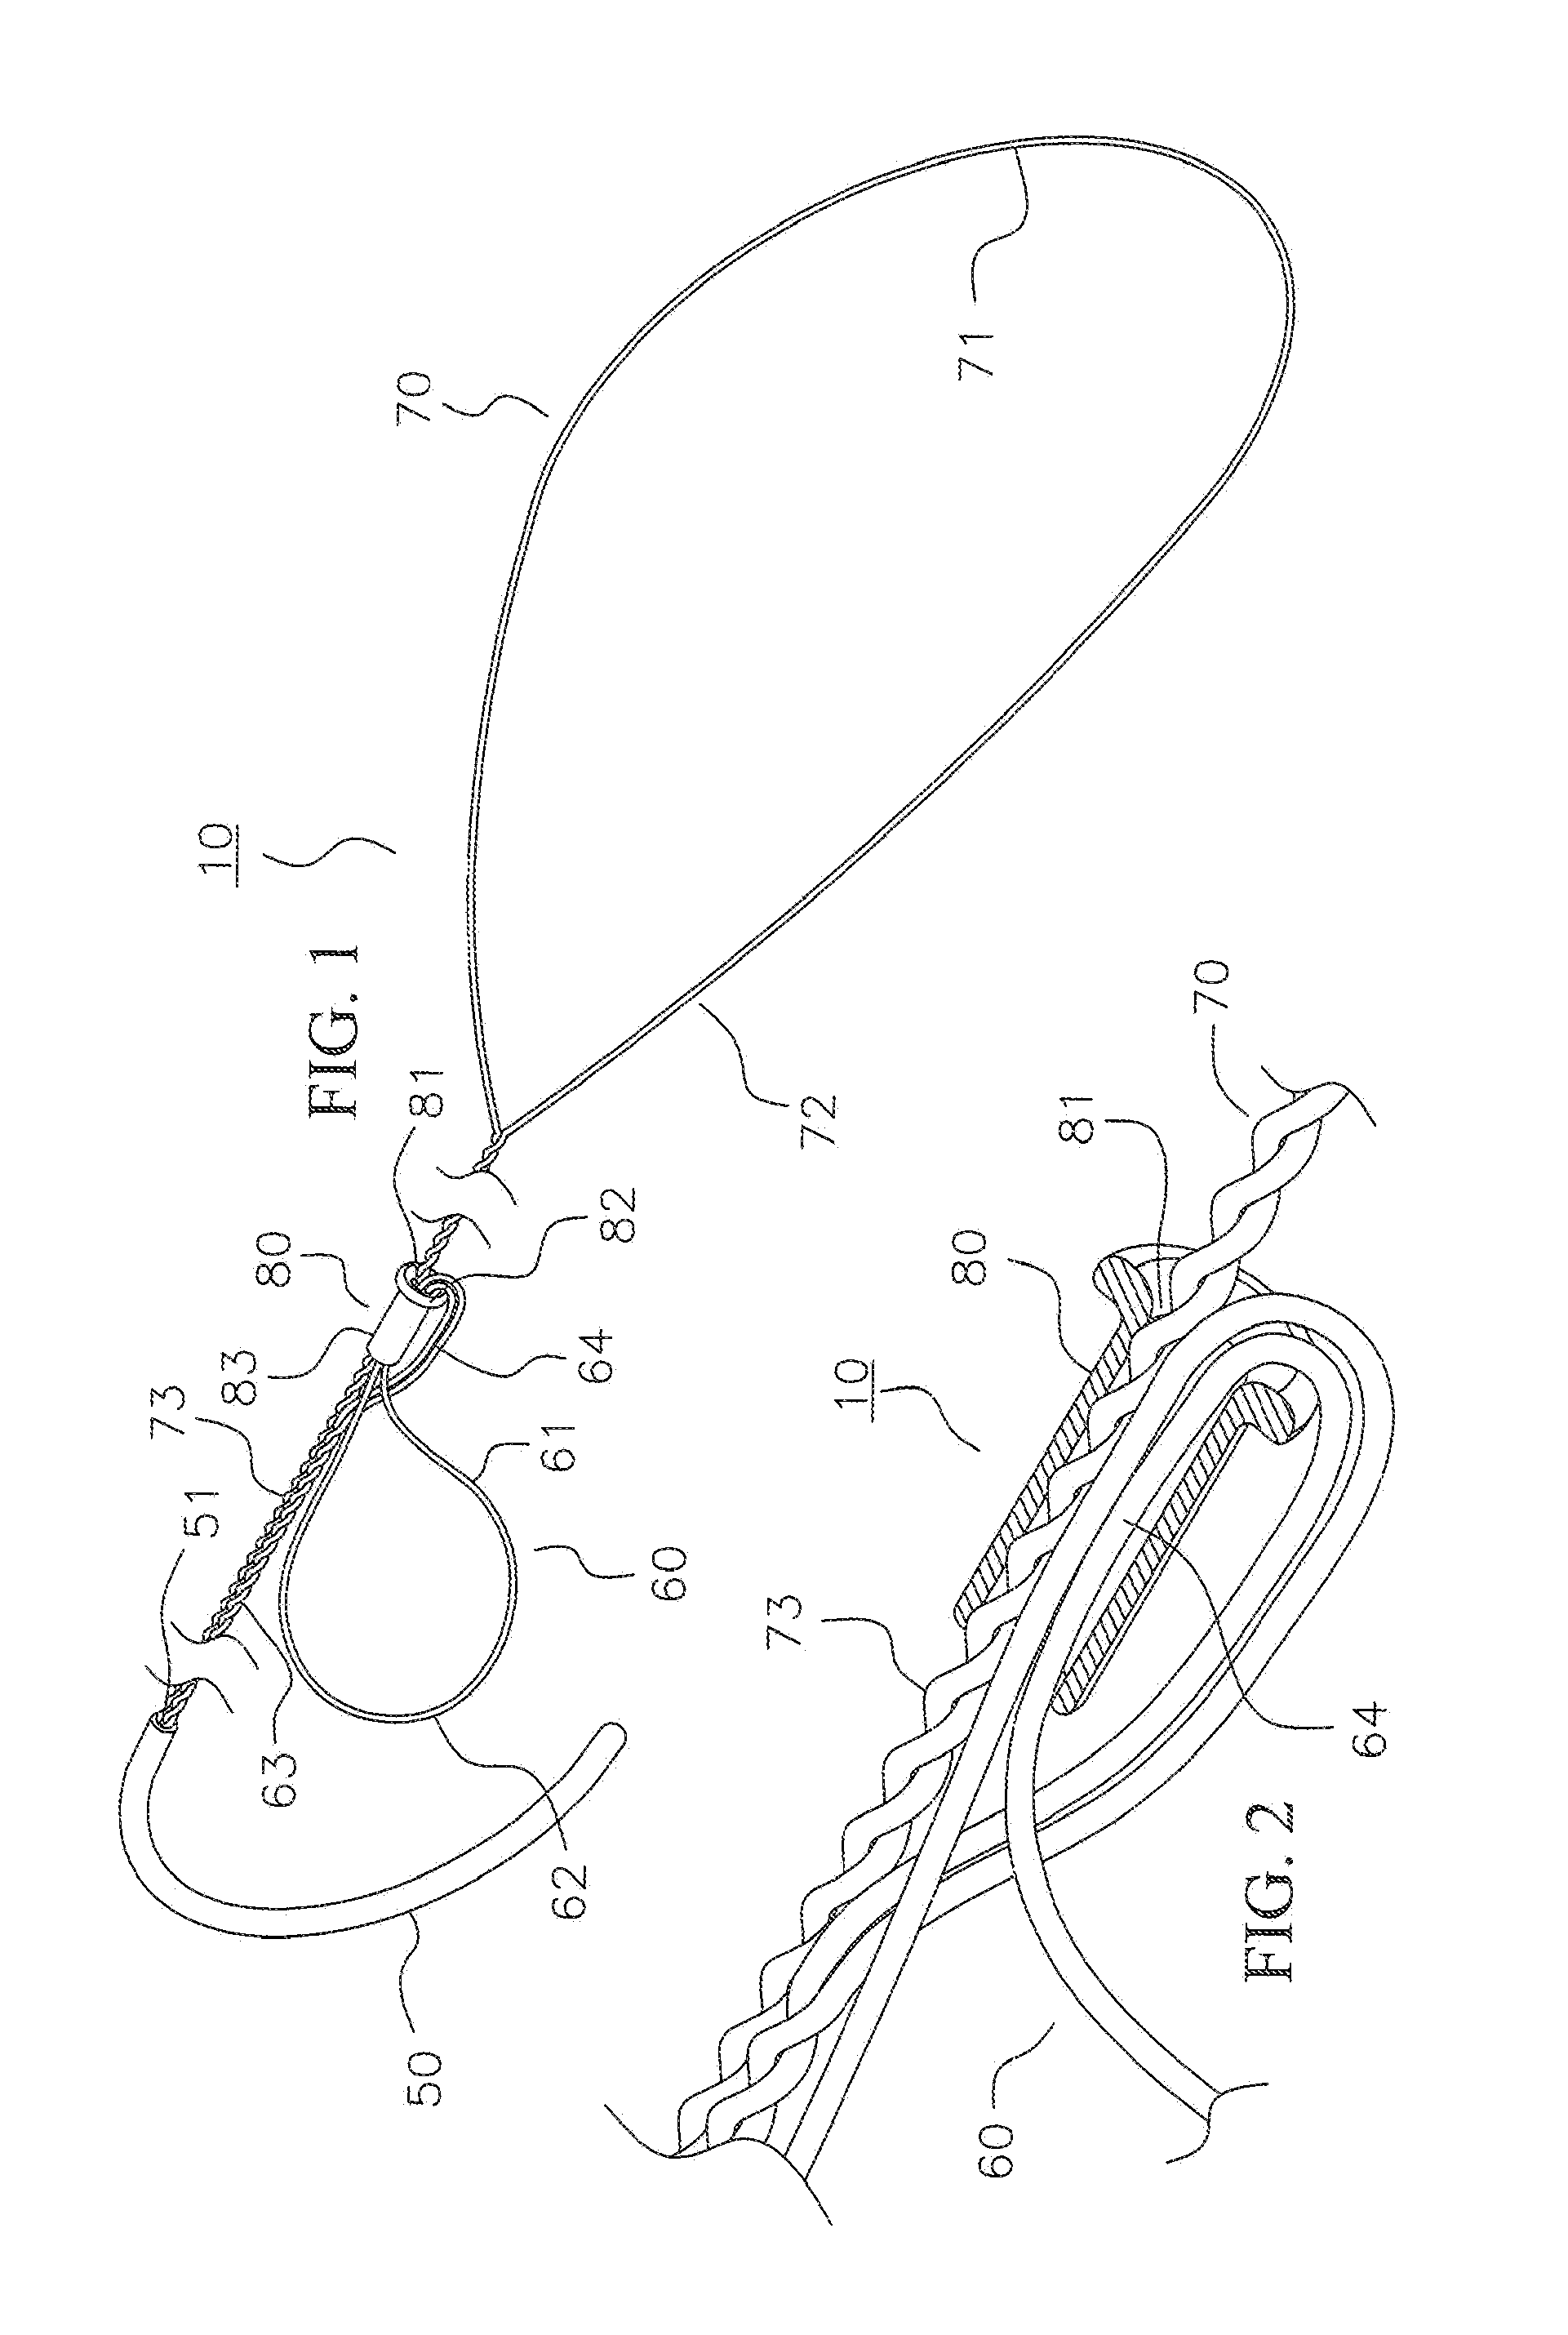 Method and devices for securing bidirectional suture loops using coaxial mechanical fasteners